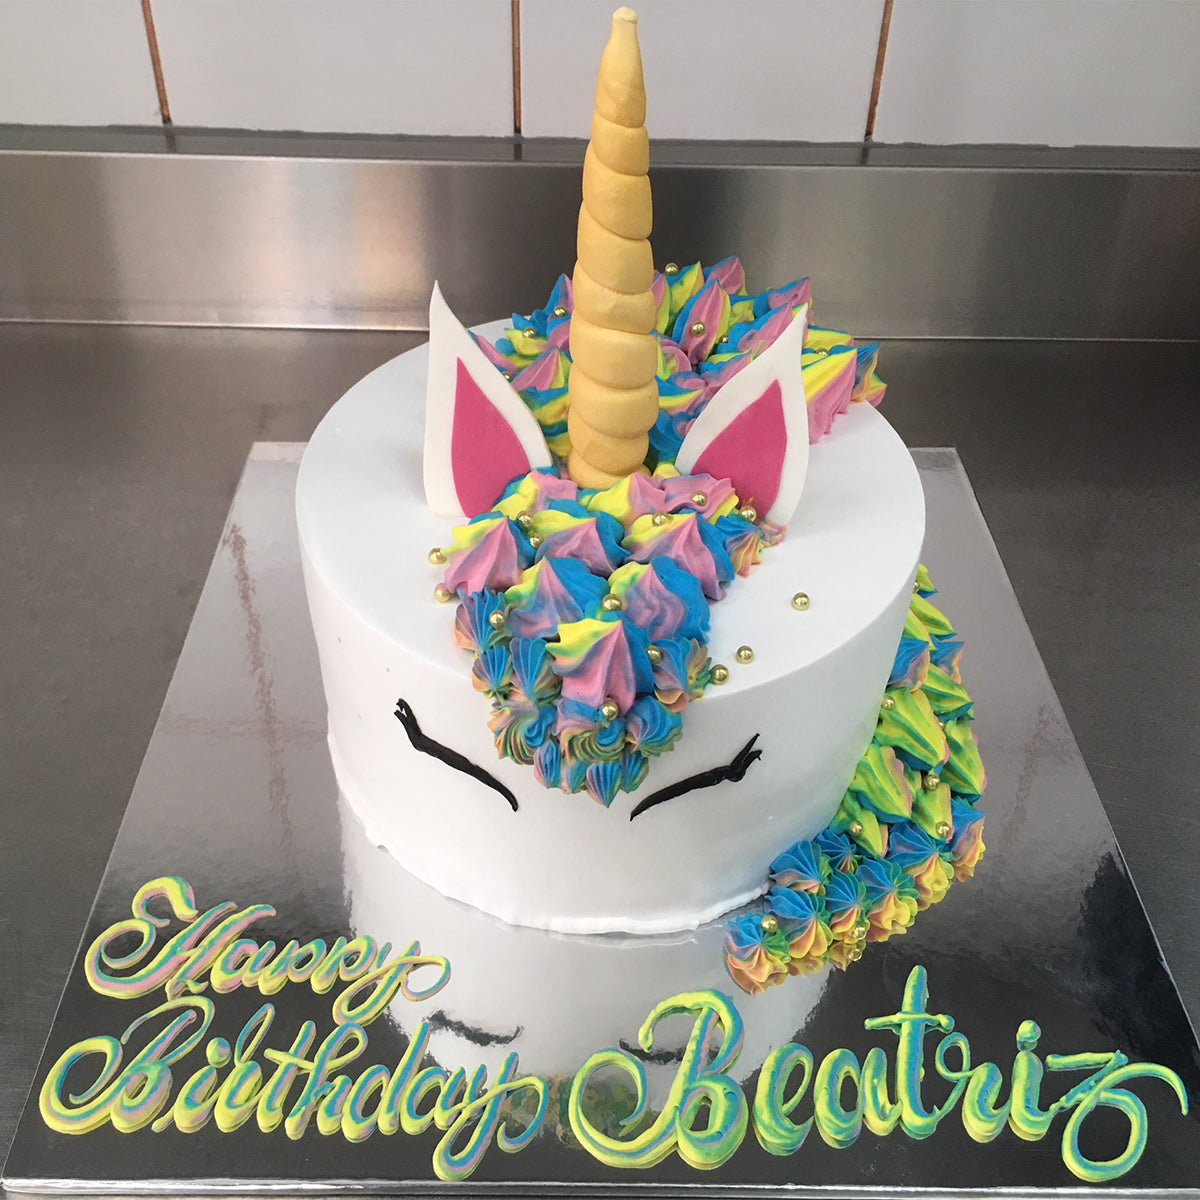 Best My little pony Theme Cake In Bangalore | Order Online